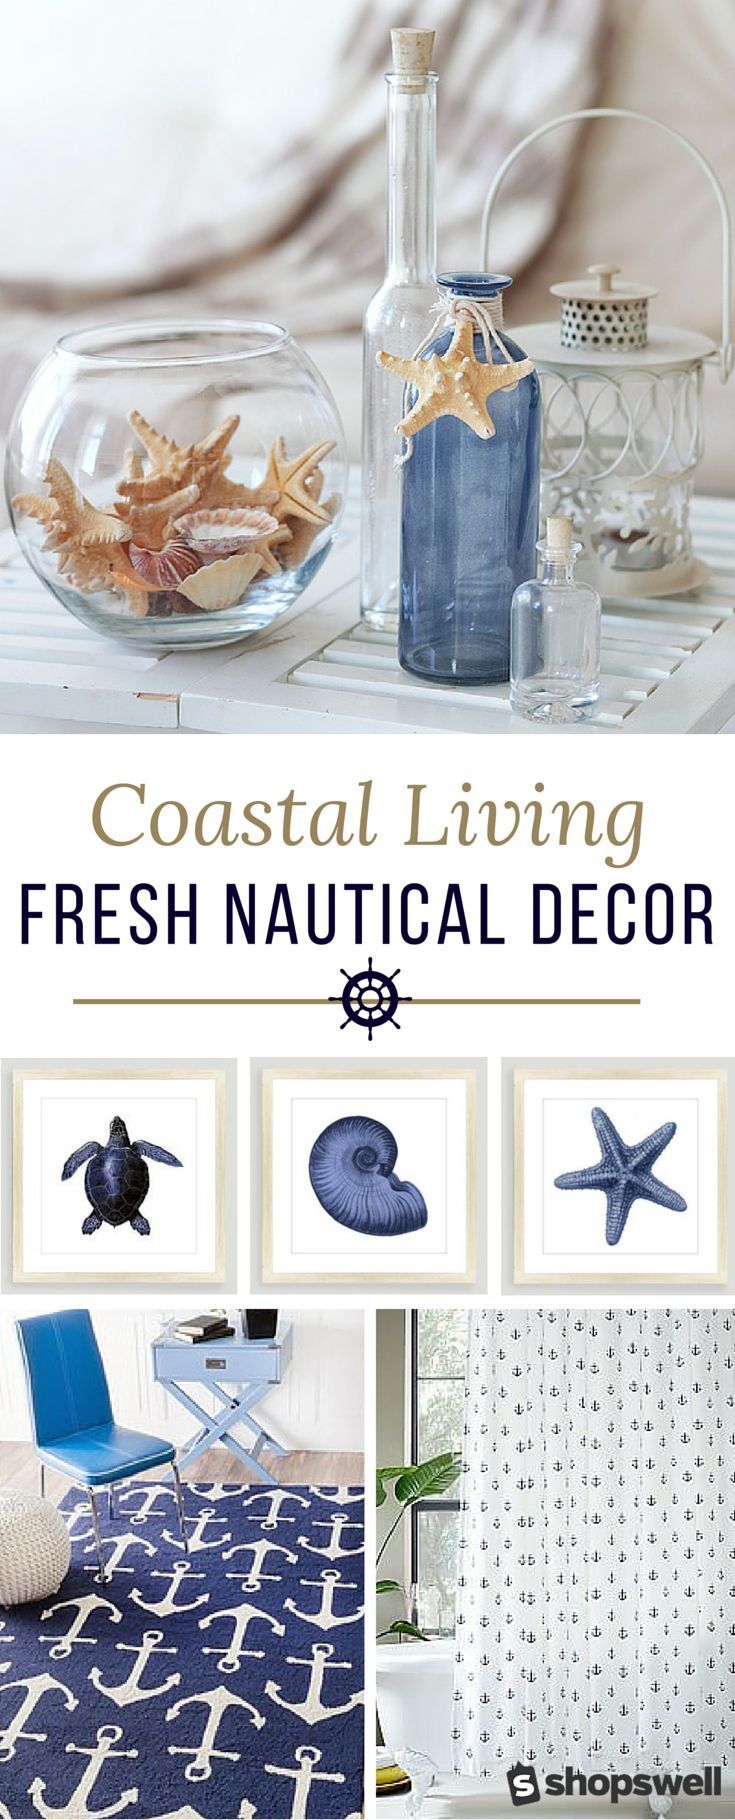 This collection of nautical decor is everything you need to create the perfect coastal living space. Hello, gorgeous beach